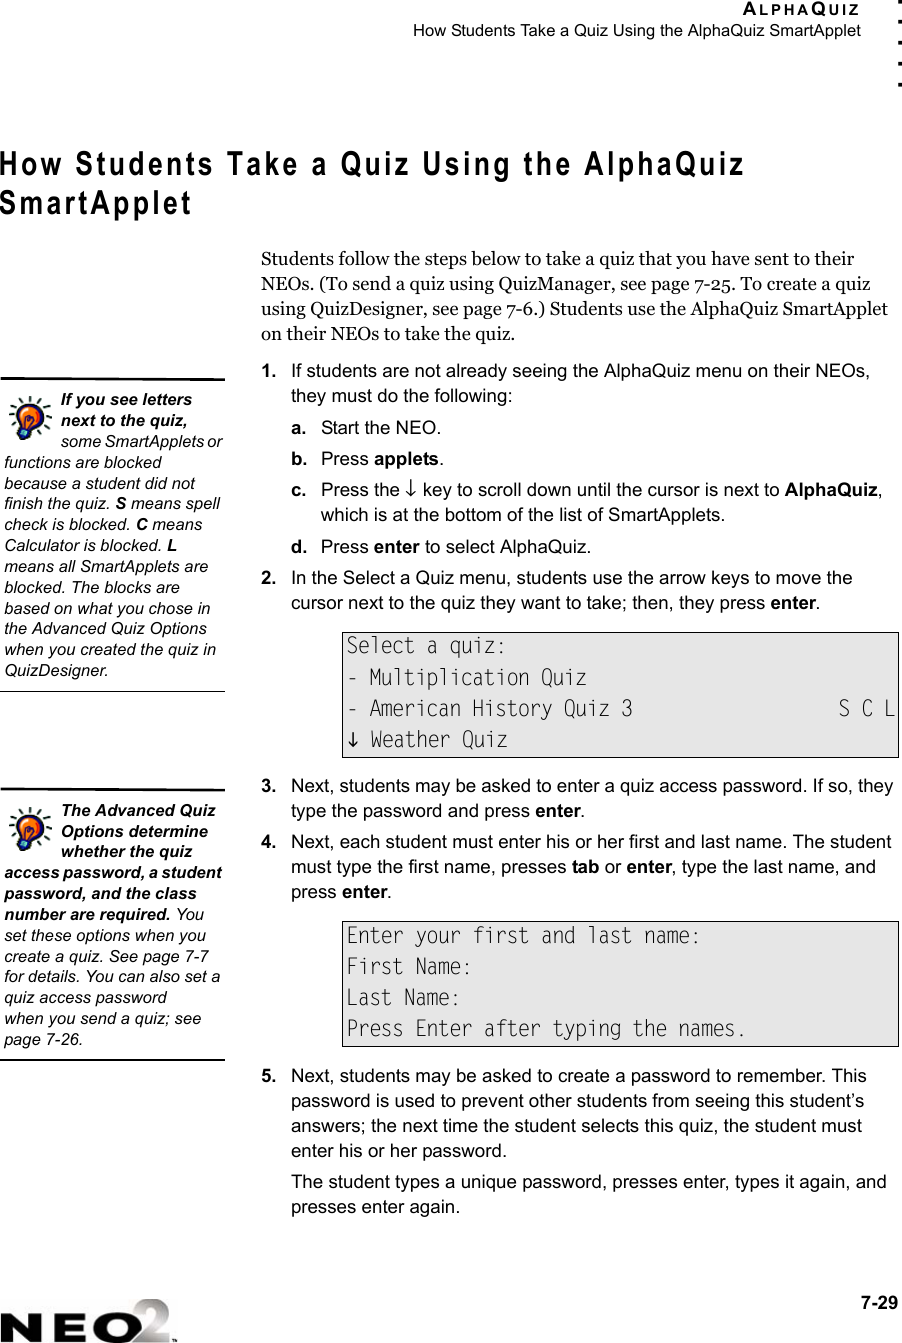 ALPHAQUIZHow Students Take a Quiz Using the AlphaQuiz SmartApplet7-29. . . . .How Students Take a Quiz Using the AlphaQuiz SmartAppletStudents follow the steps below to take a quiz that you have sent to their NEOs. (To send a quiz using QuizManager, see page 7-25. To create a quiz using QuizDesigner, see page 7-6.) Students use the AlphaQuiz SmartApplet on their NEOs to take the quiz.1. If students are not already seeing the AlphaQuiz menu on their NEOs, they must do the following:a. Start the NEO.b. Press applets.c. Press the ↓ key to scroll down until the cursor is next to AlphaQuiz, which is at the bottom of the list of SmartApplets.d. Press enter to select AlphaQuiz.2. In the Select a Quiz menu, students use the arrow keys to move the cursor next to the quiz they want to take; then, they press enter.3. Next, students may be asked to enter a quiz access password. If so, they type the password and press enter. 4. Next, each student must enter his or her first and last name. The student must type the first name, presses tab or enter, type the last name, and press enter.5. Next, students may be asked to create a password to remember. This password is used to prevent other students from seeing this student’s answers; the next time the student selects this quiz, the student must enter his or her password.The student types a unique password, presses enter, types it again, and presses enter again.Select a quiz:- Multiplication Quiz- American History Quiz 3                  S C LL Weather QuizEnter your first and last name:First Name:Last Name:Press Enter after typing the names.If you see letters next to the quiz, some SmartApplets or functions are blocked because a student did not finish the quiz. S means spell check is blocked. C means Calculator is blocked. L means all SmartApplets are blocked. The blocks are based on what you chose in the Advanced Quiz Options when you created the quiz in QuizDesigner.The Advanced Quiz Options determine whether the quiz access password, a student password, and the class number are required. You set these options when you create a quiz. See page 7-7 for details. You can also set a quiz access passwordwhen you send a quiz; see page 7-26.